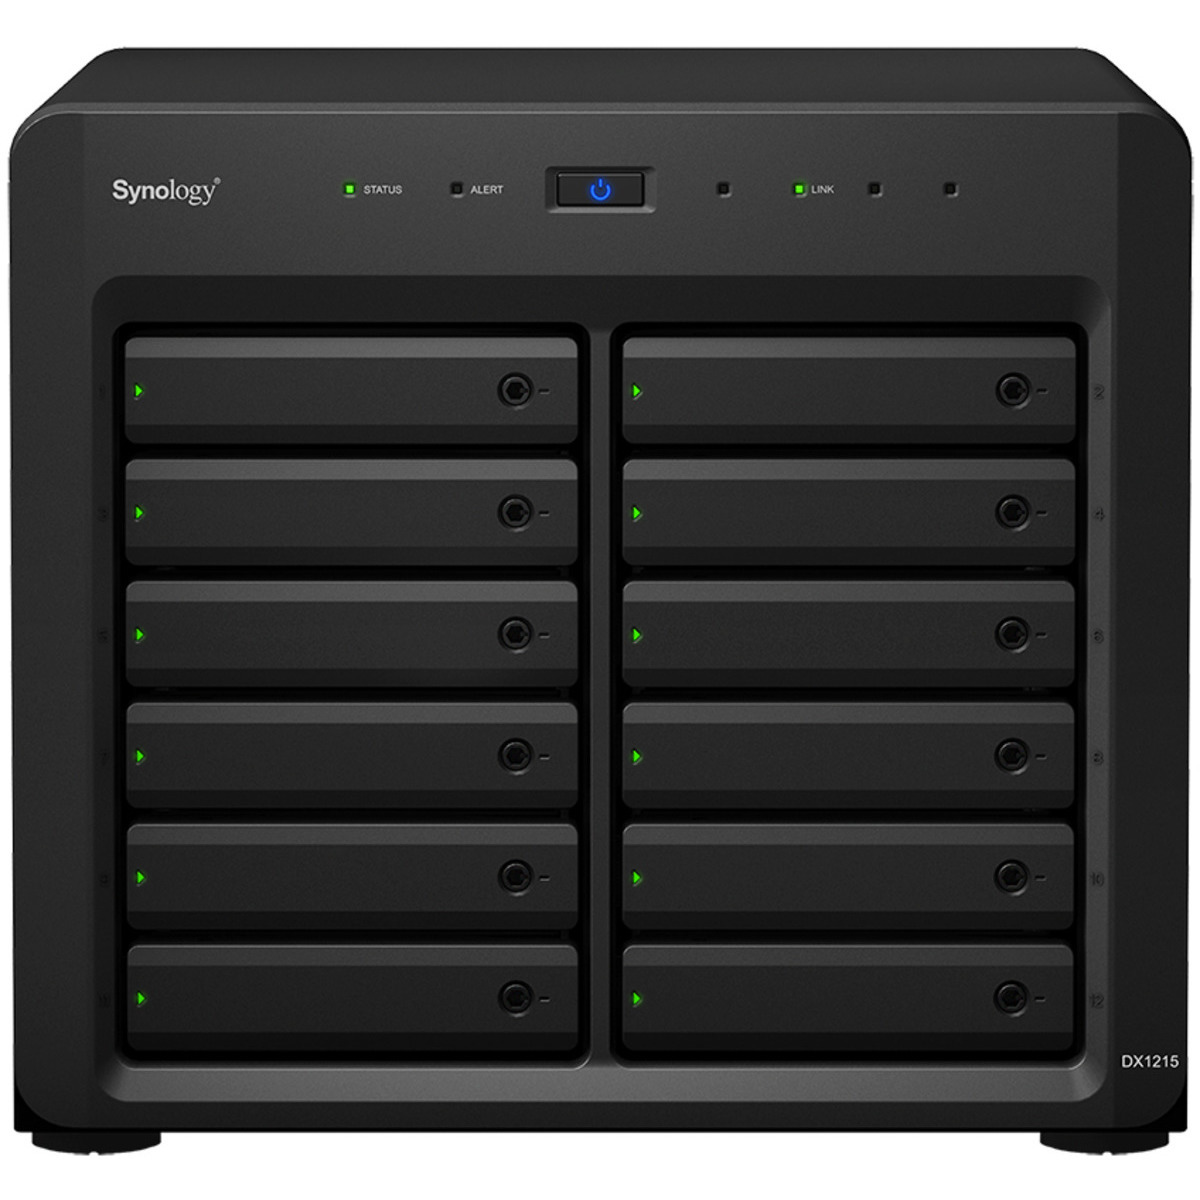 Synology DX1215II External Expansion Drive 6tb 12-Bay Desktop Multimedia / Power User / Business Expansion Enclosure 12x500gb Sandisk Ultra 3D SDSSDH3-500G 2.5 560/520MB/s SATA 6Gb/s SSD CONSUMER Class Drives Installed - Burn-In Tested DX1215II External Expansion Drive